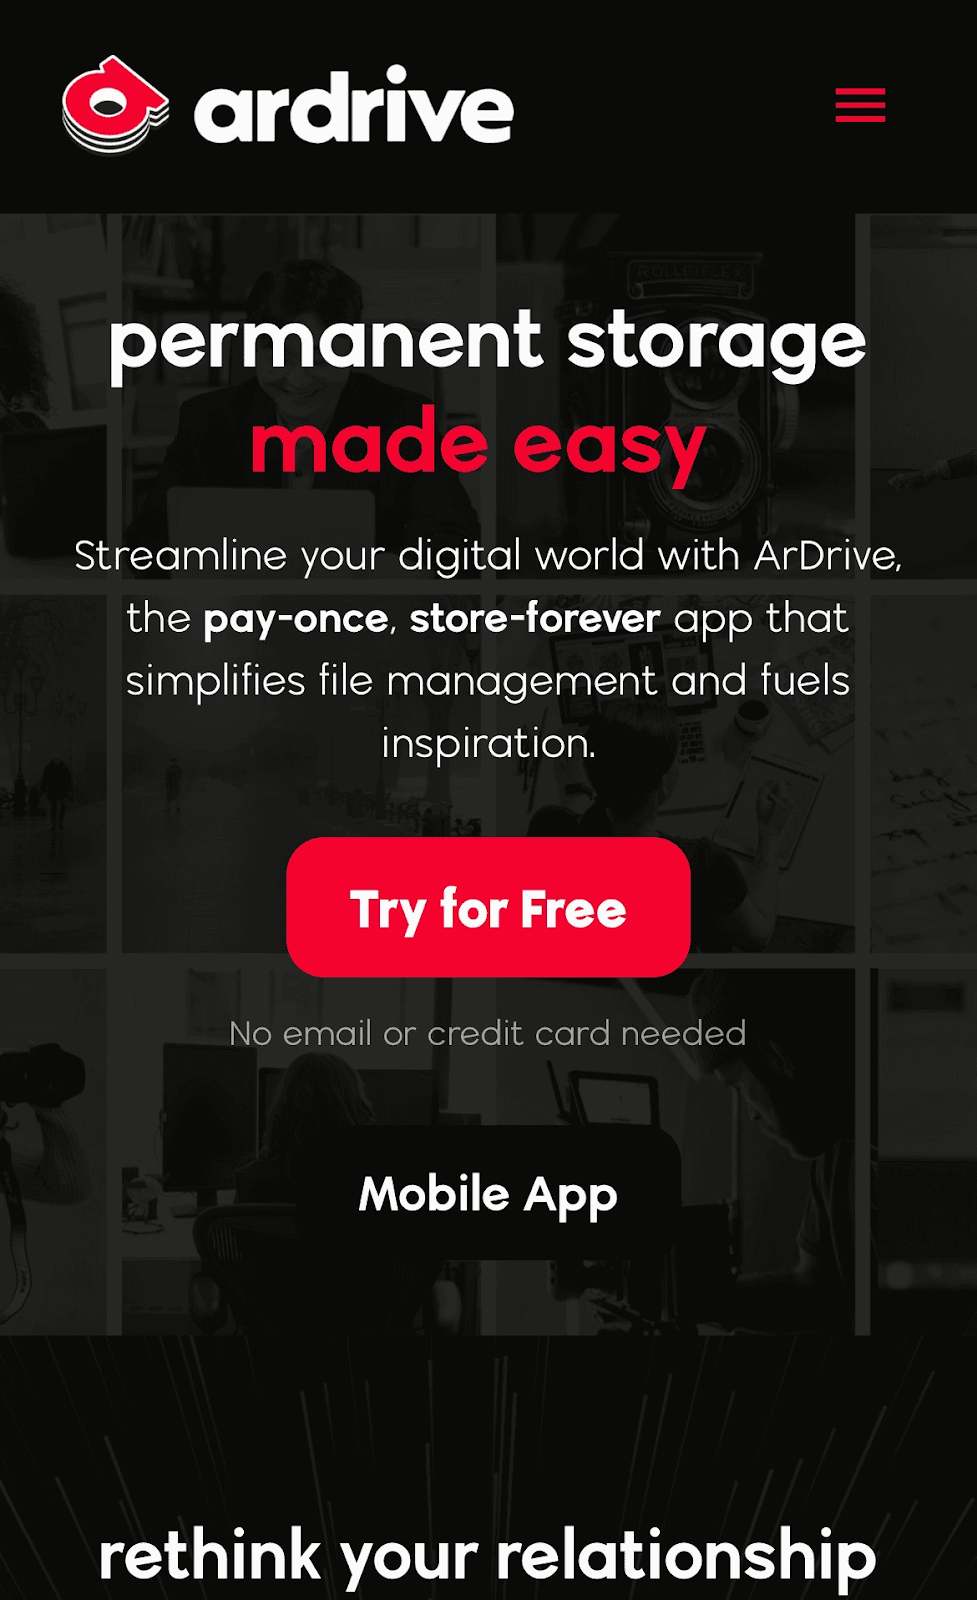 ArDrive’s homepage on mobile